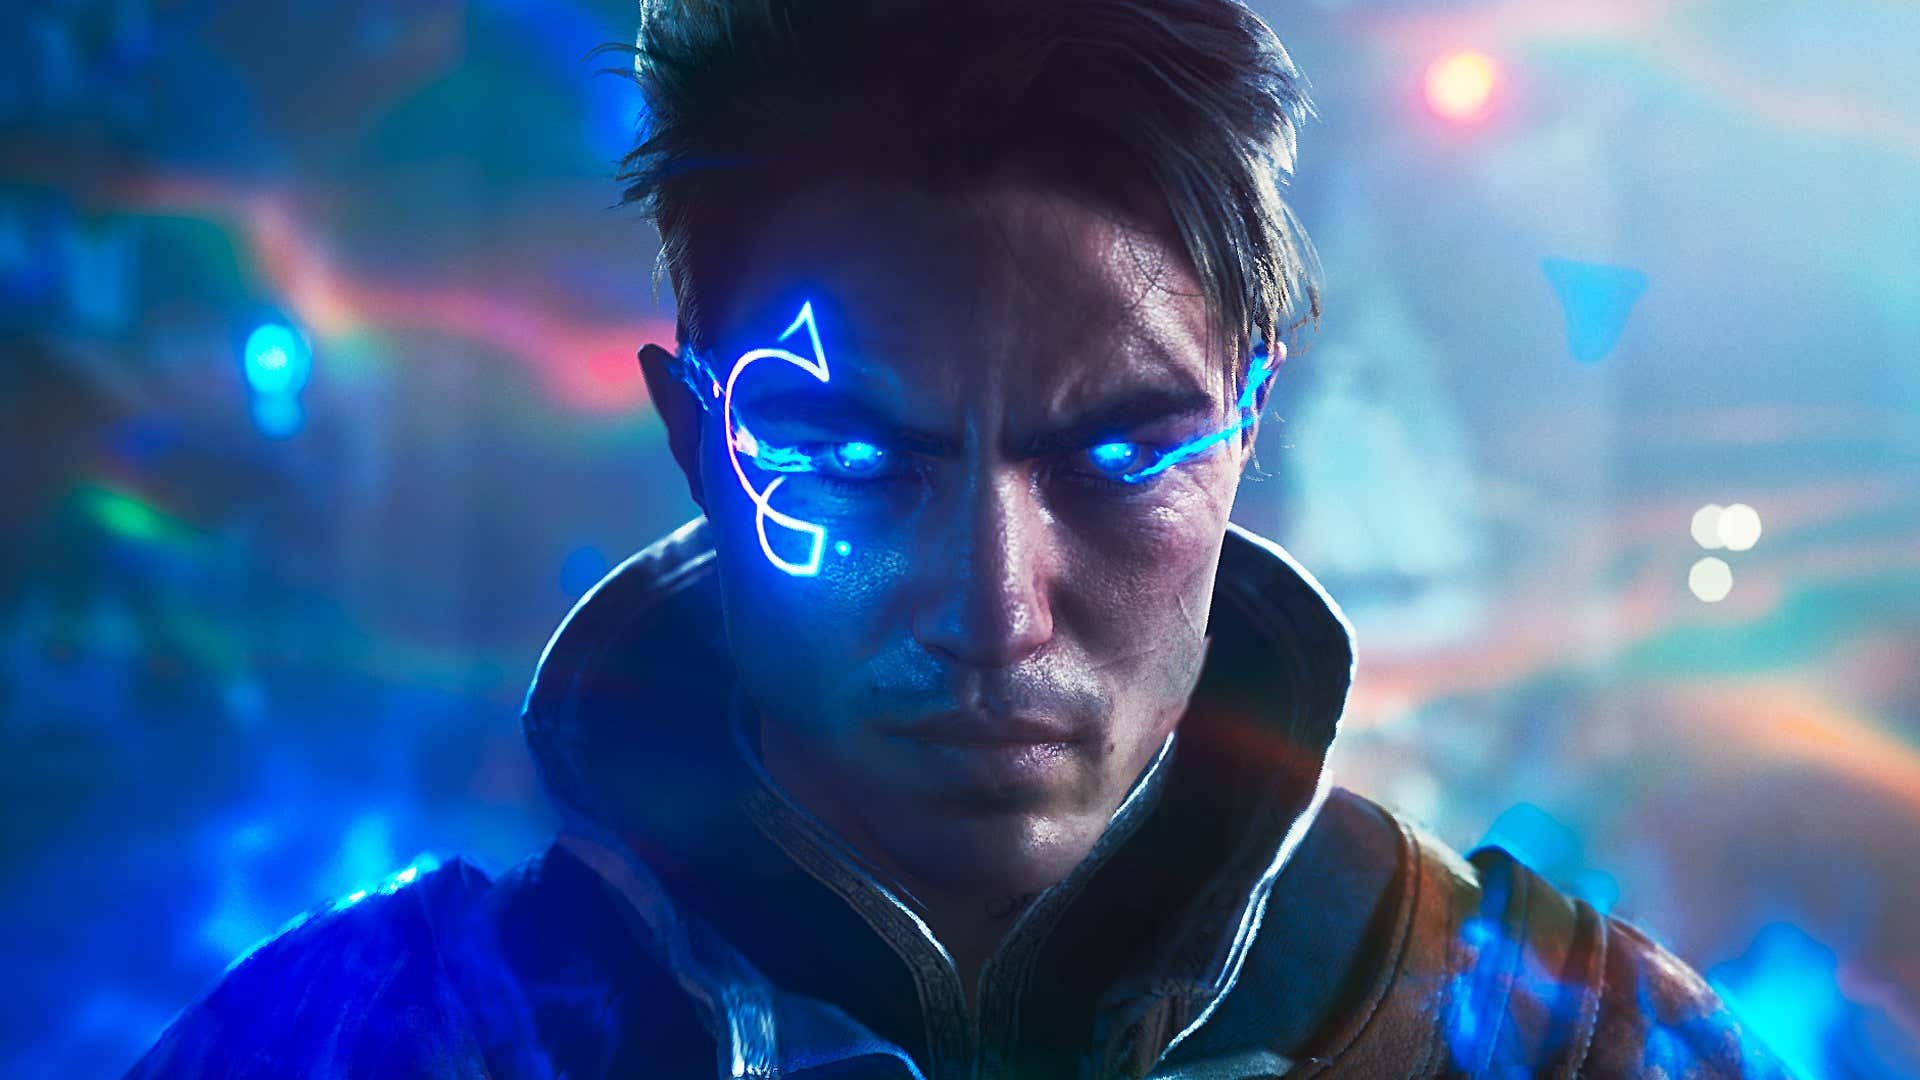 One image shows a CG man with a glowing blue tattoo on his face. 